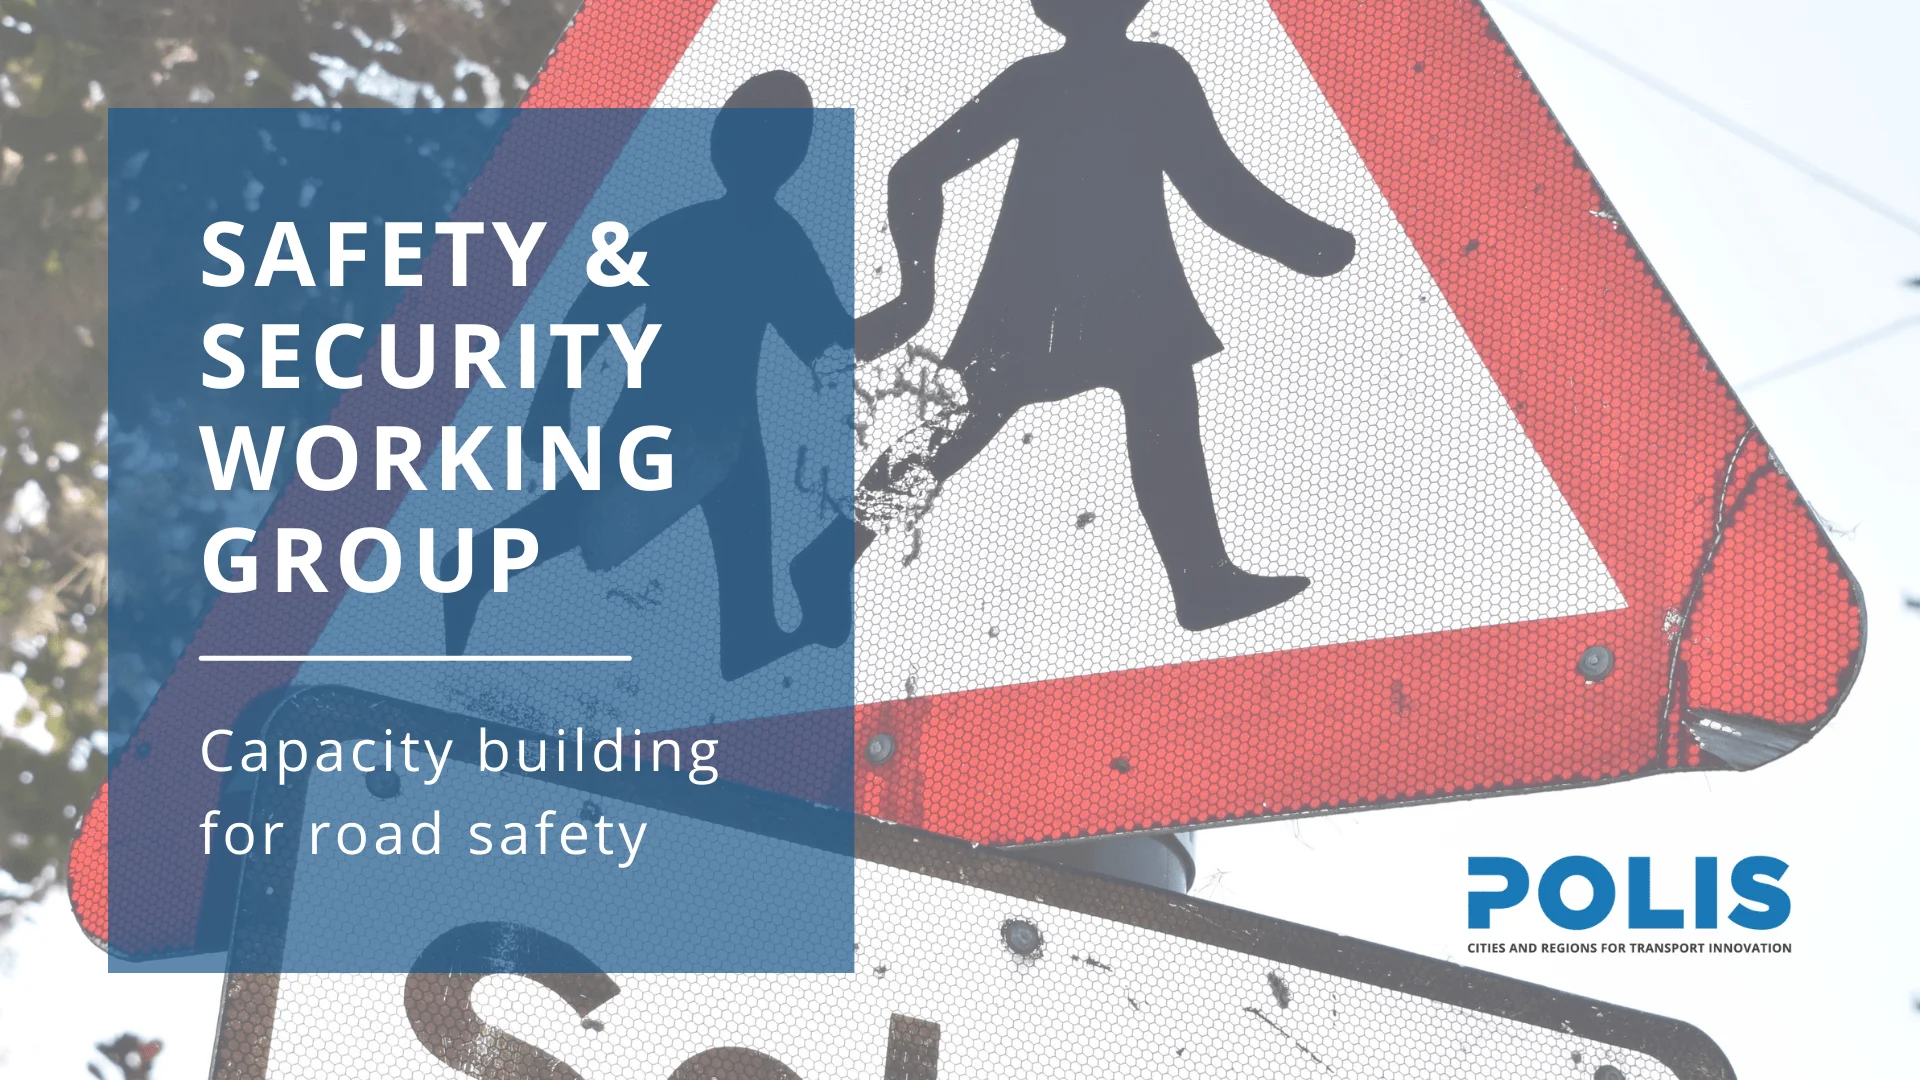 Safety & Security Working Group meets to discuss capacity building for road safety